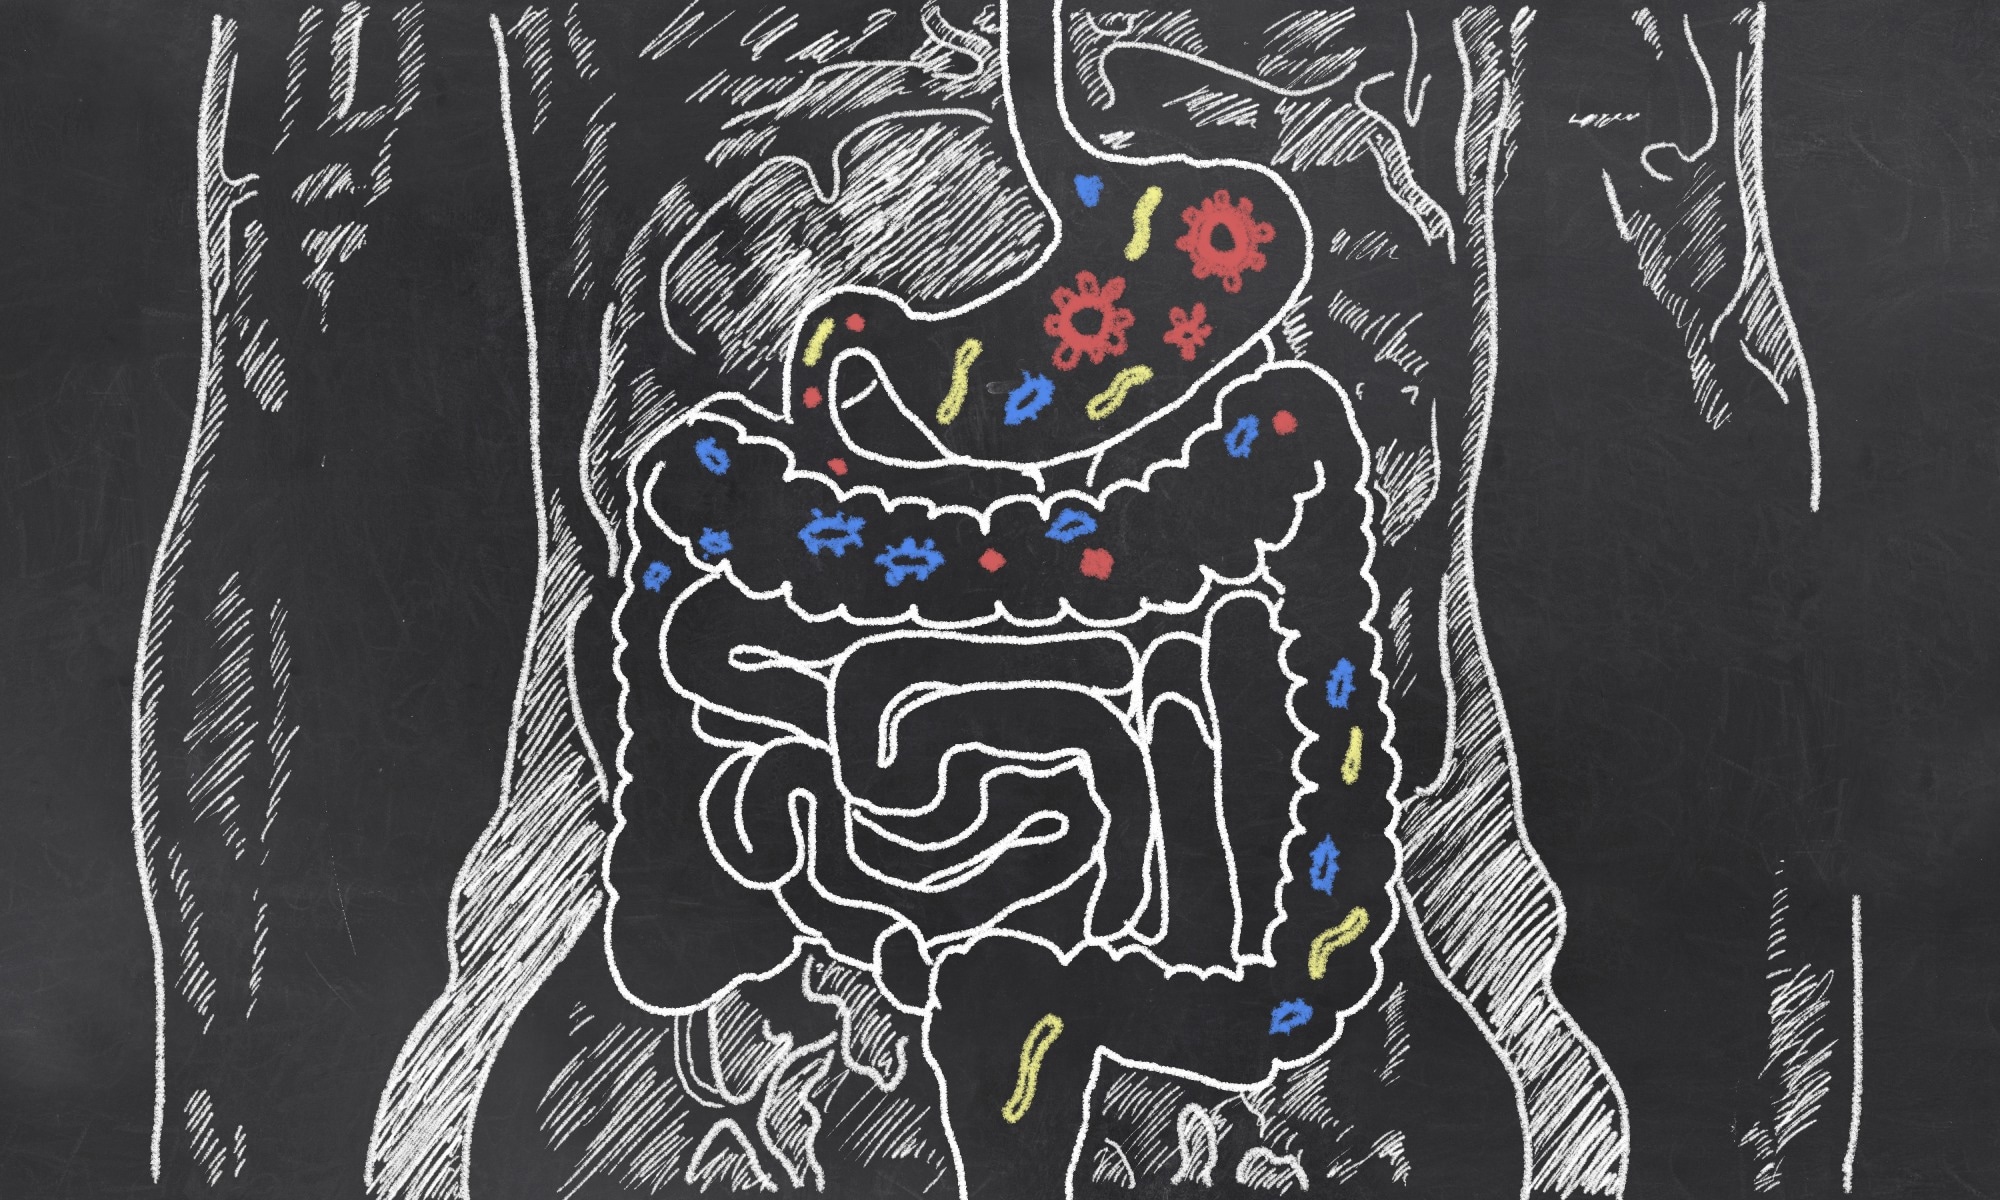 Review: Circadian rhythms, gut microbiota, and diet: possible implications for health. Image Credit: T. L. Furrer / Shutterstock